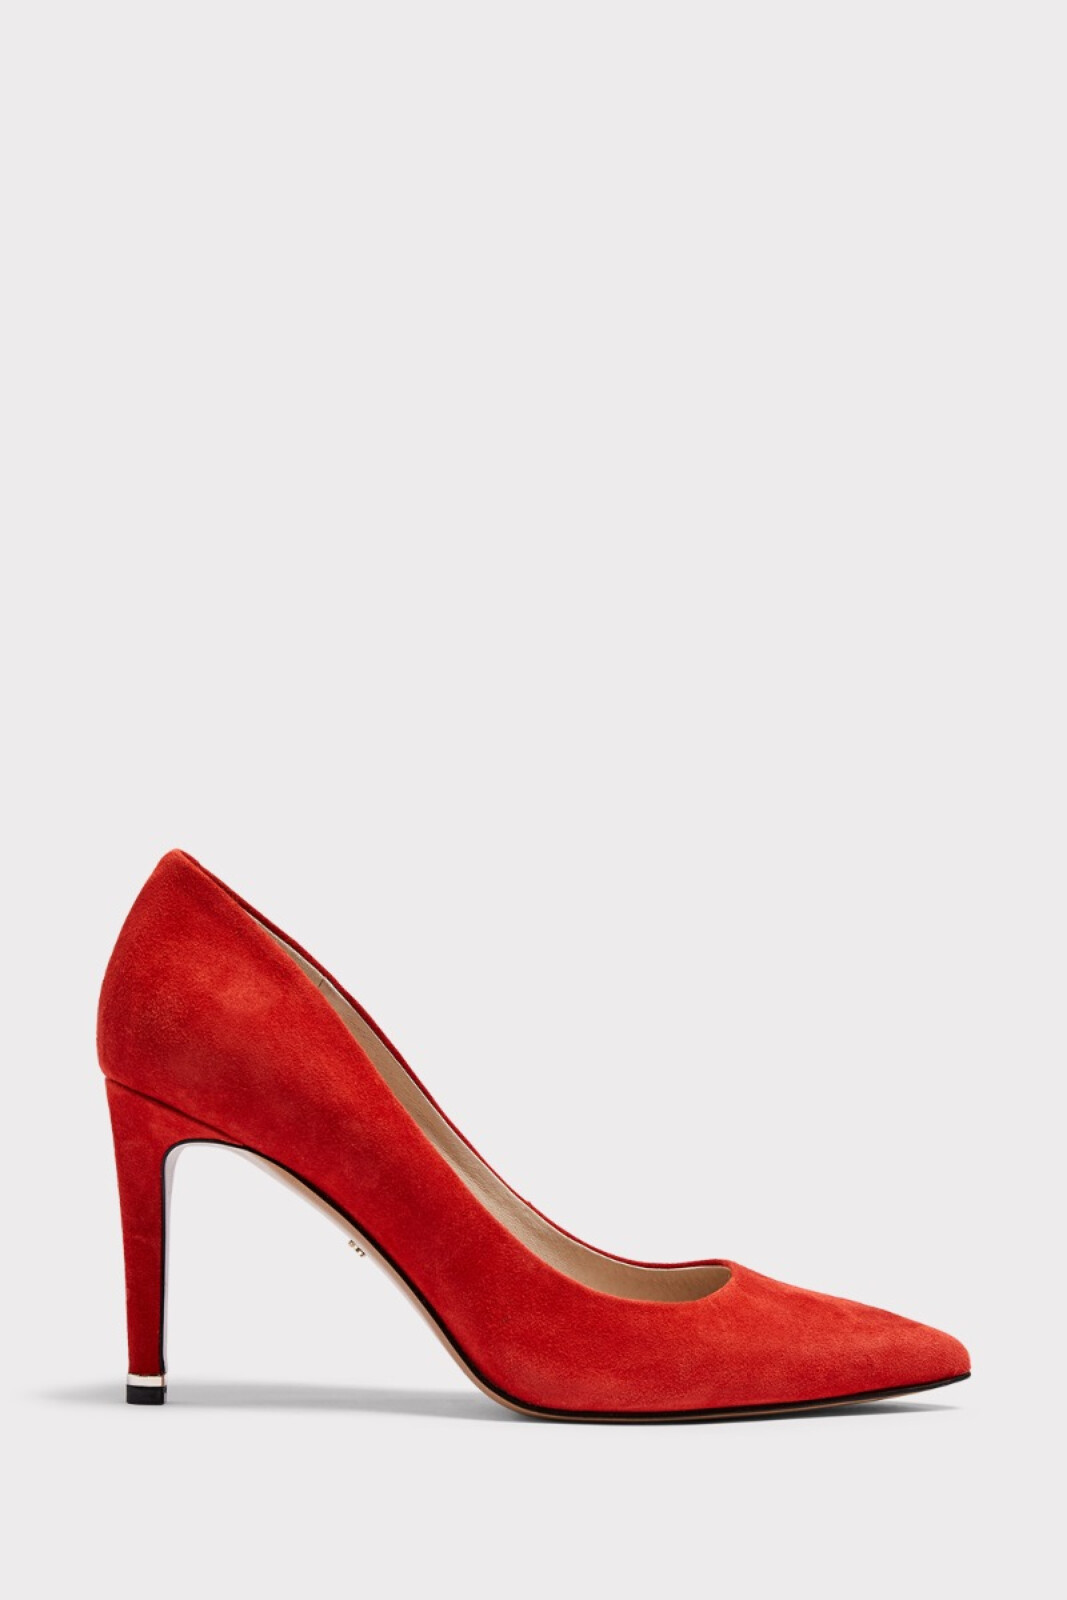 KENNETH COLE Riley Pump | EVEREVE